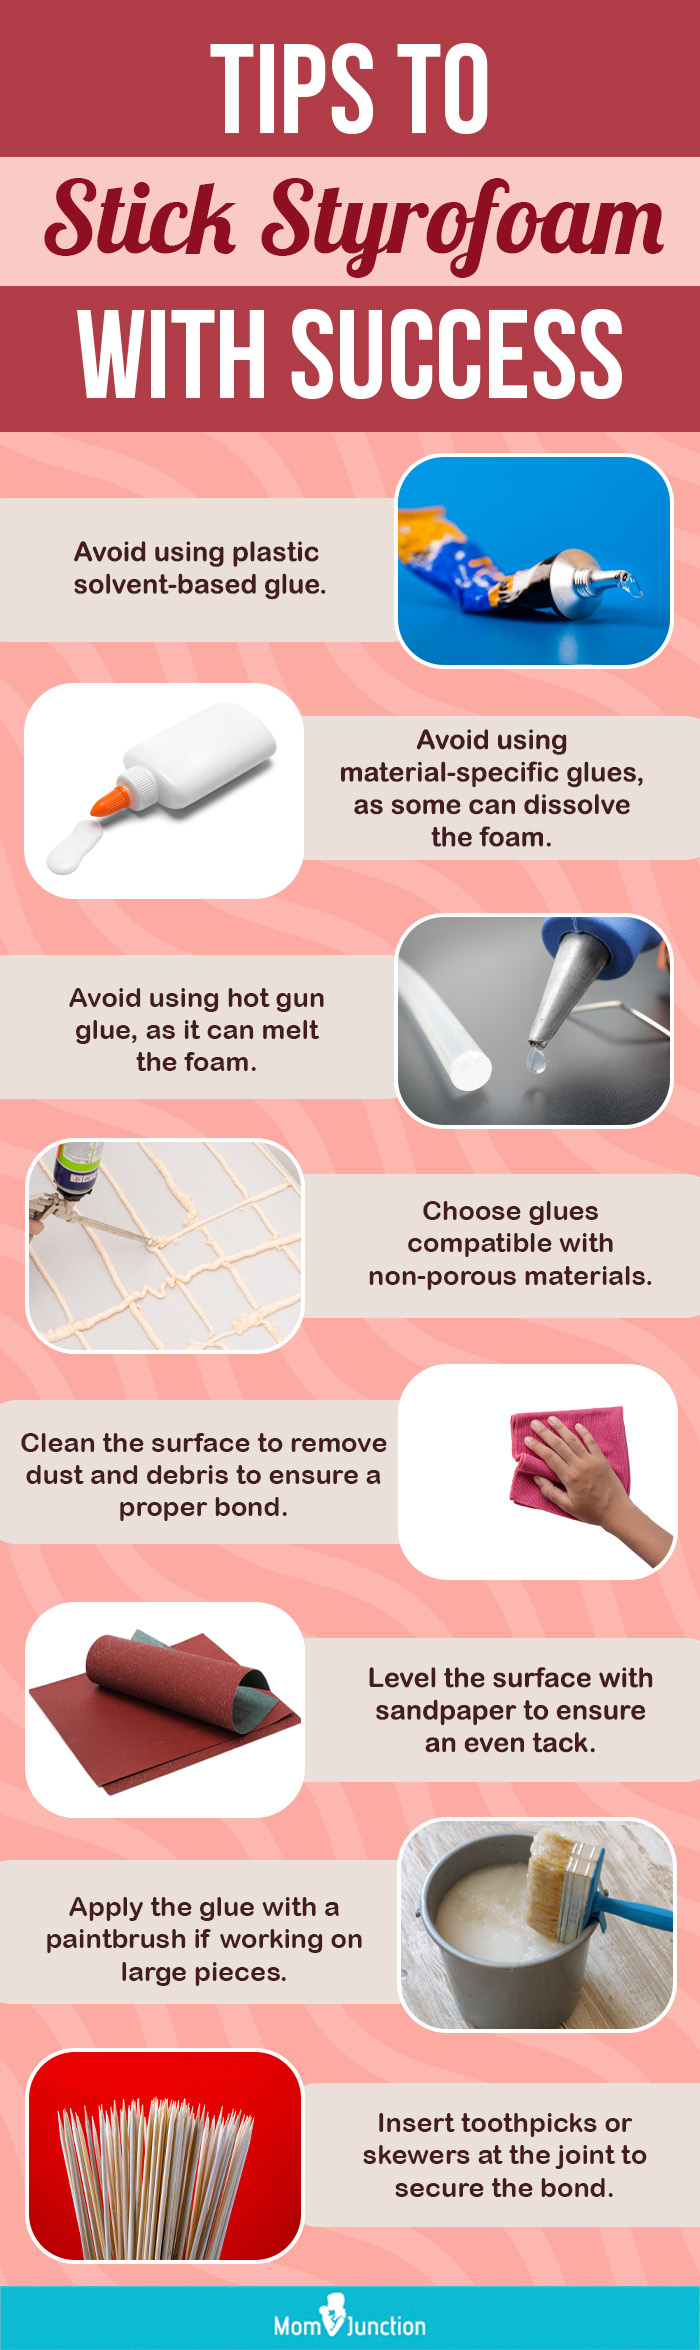 Tips To Stick Styrofoam With Success